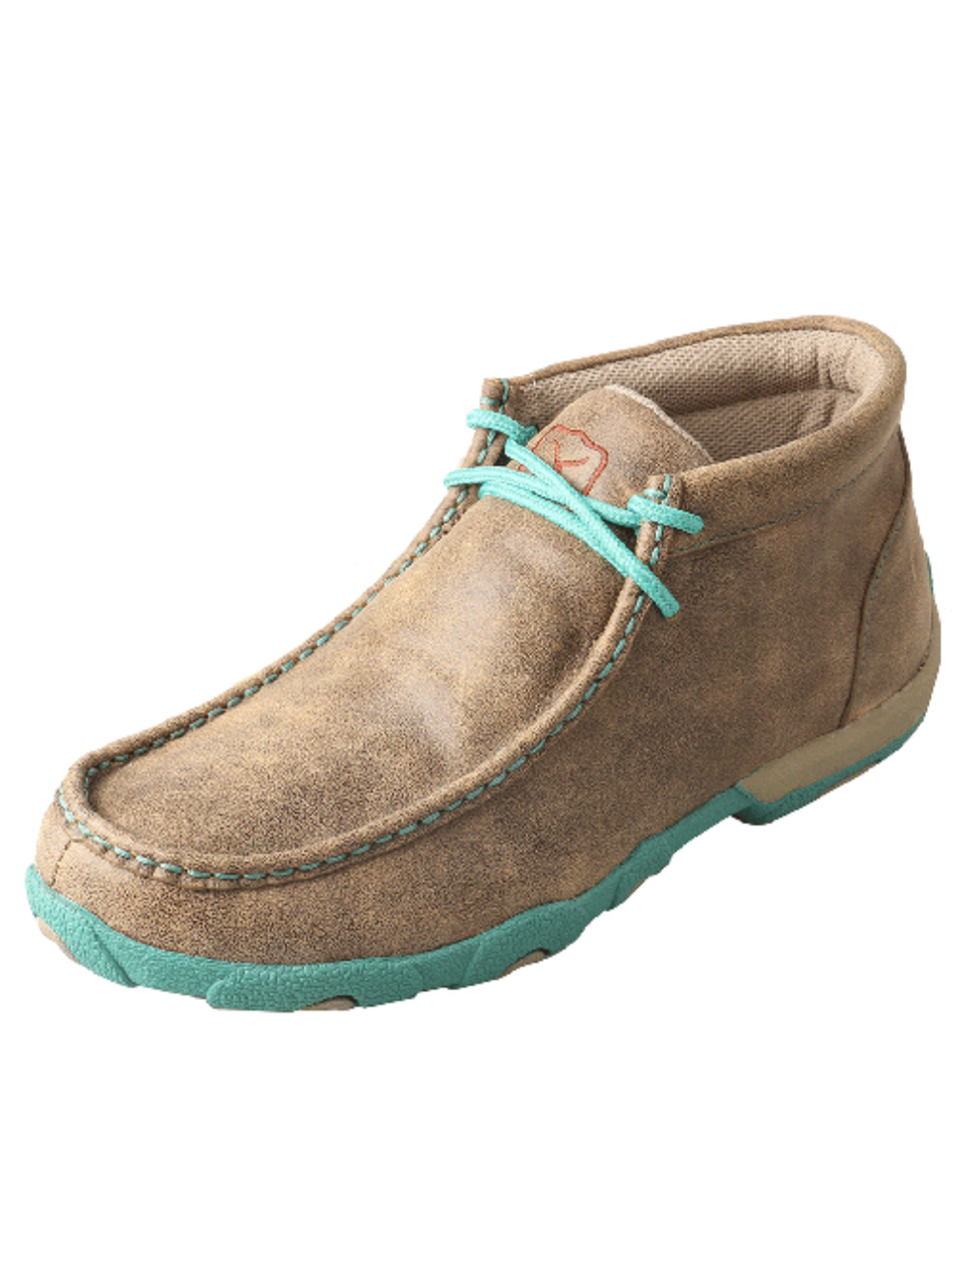 Women's Twisted X Driving Moccasins 